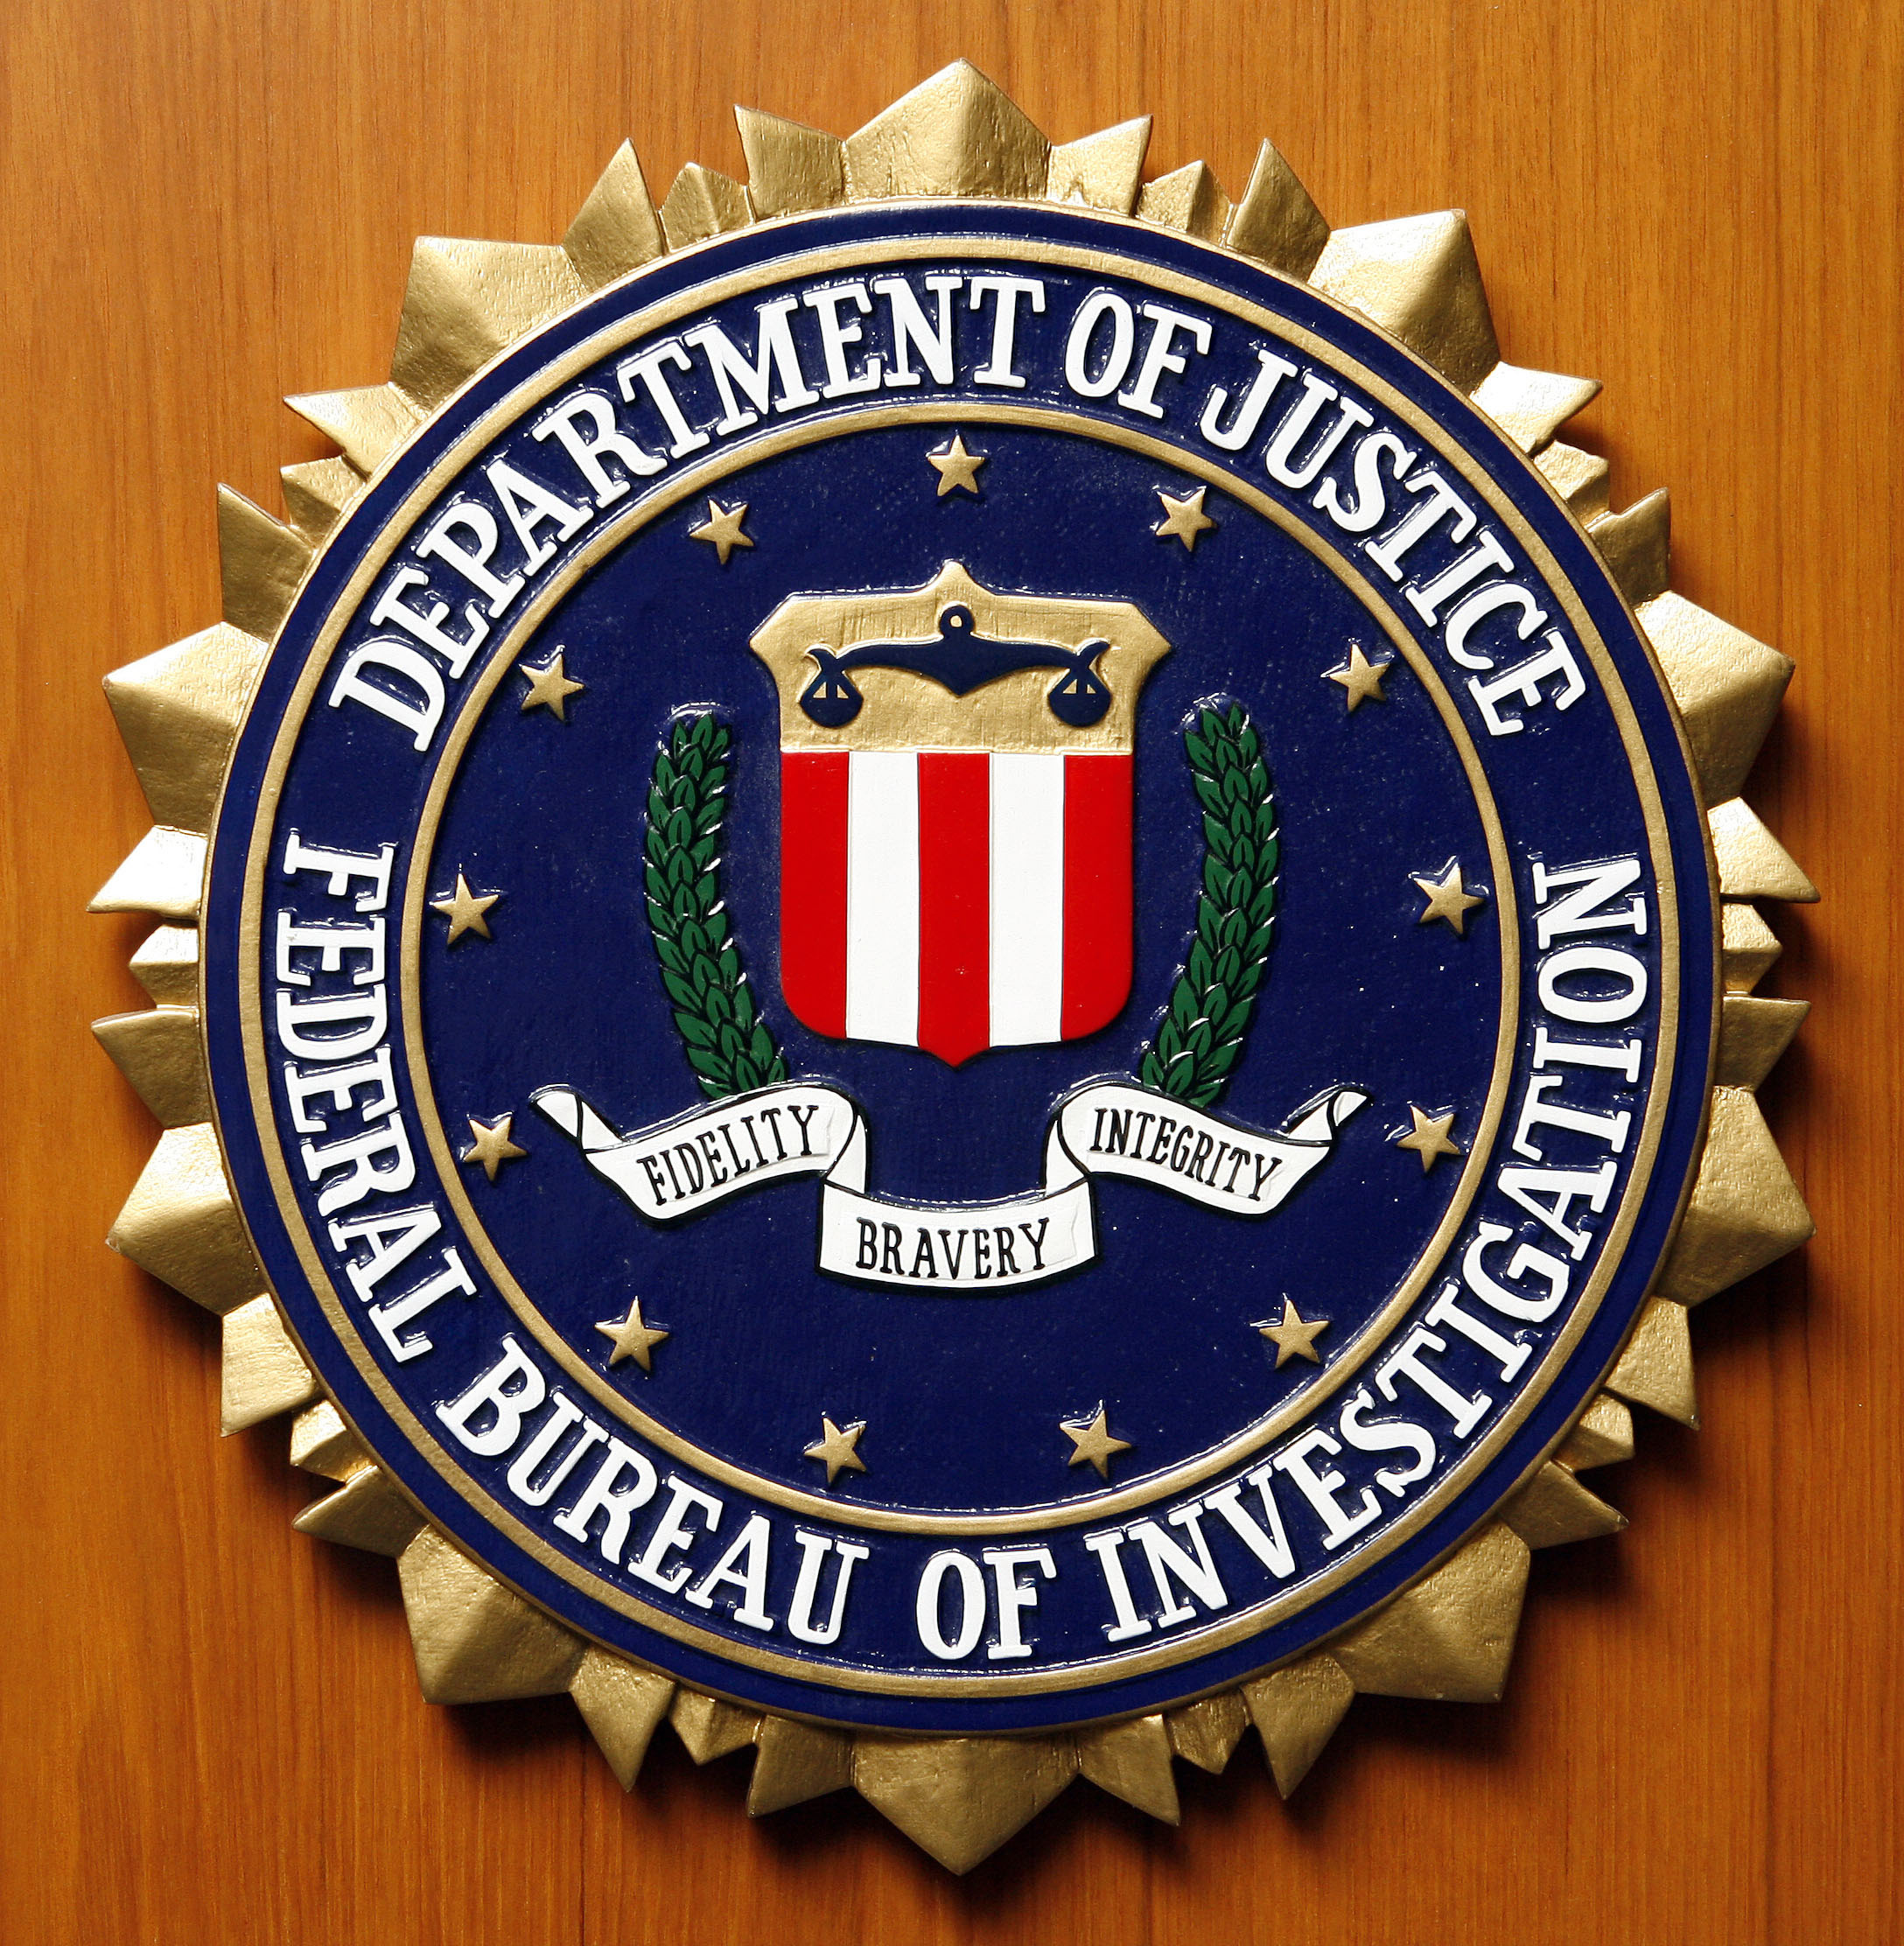 Amazing Powers Fbi Pictures & Backgrounds